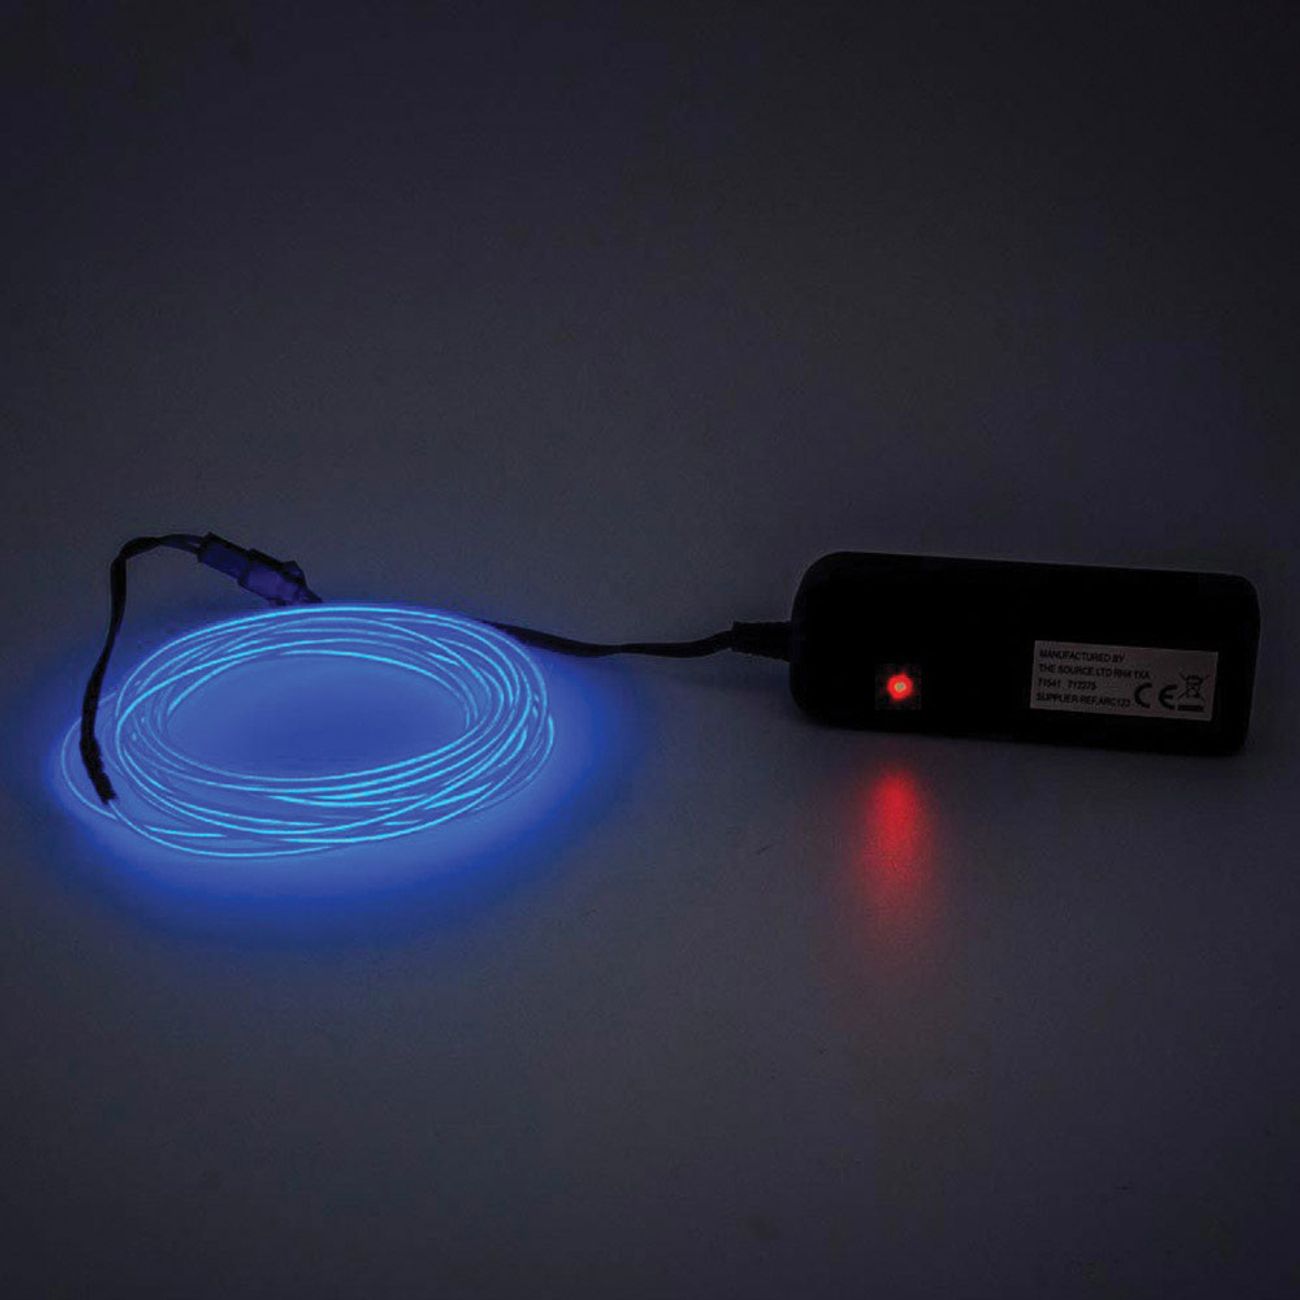 multifunction-shape-your-own-neon-light-81129-3